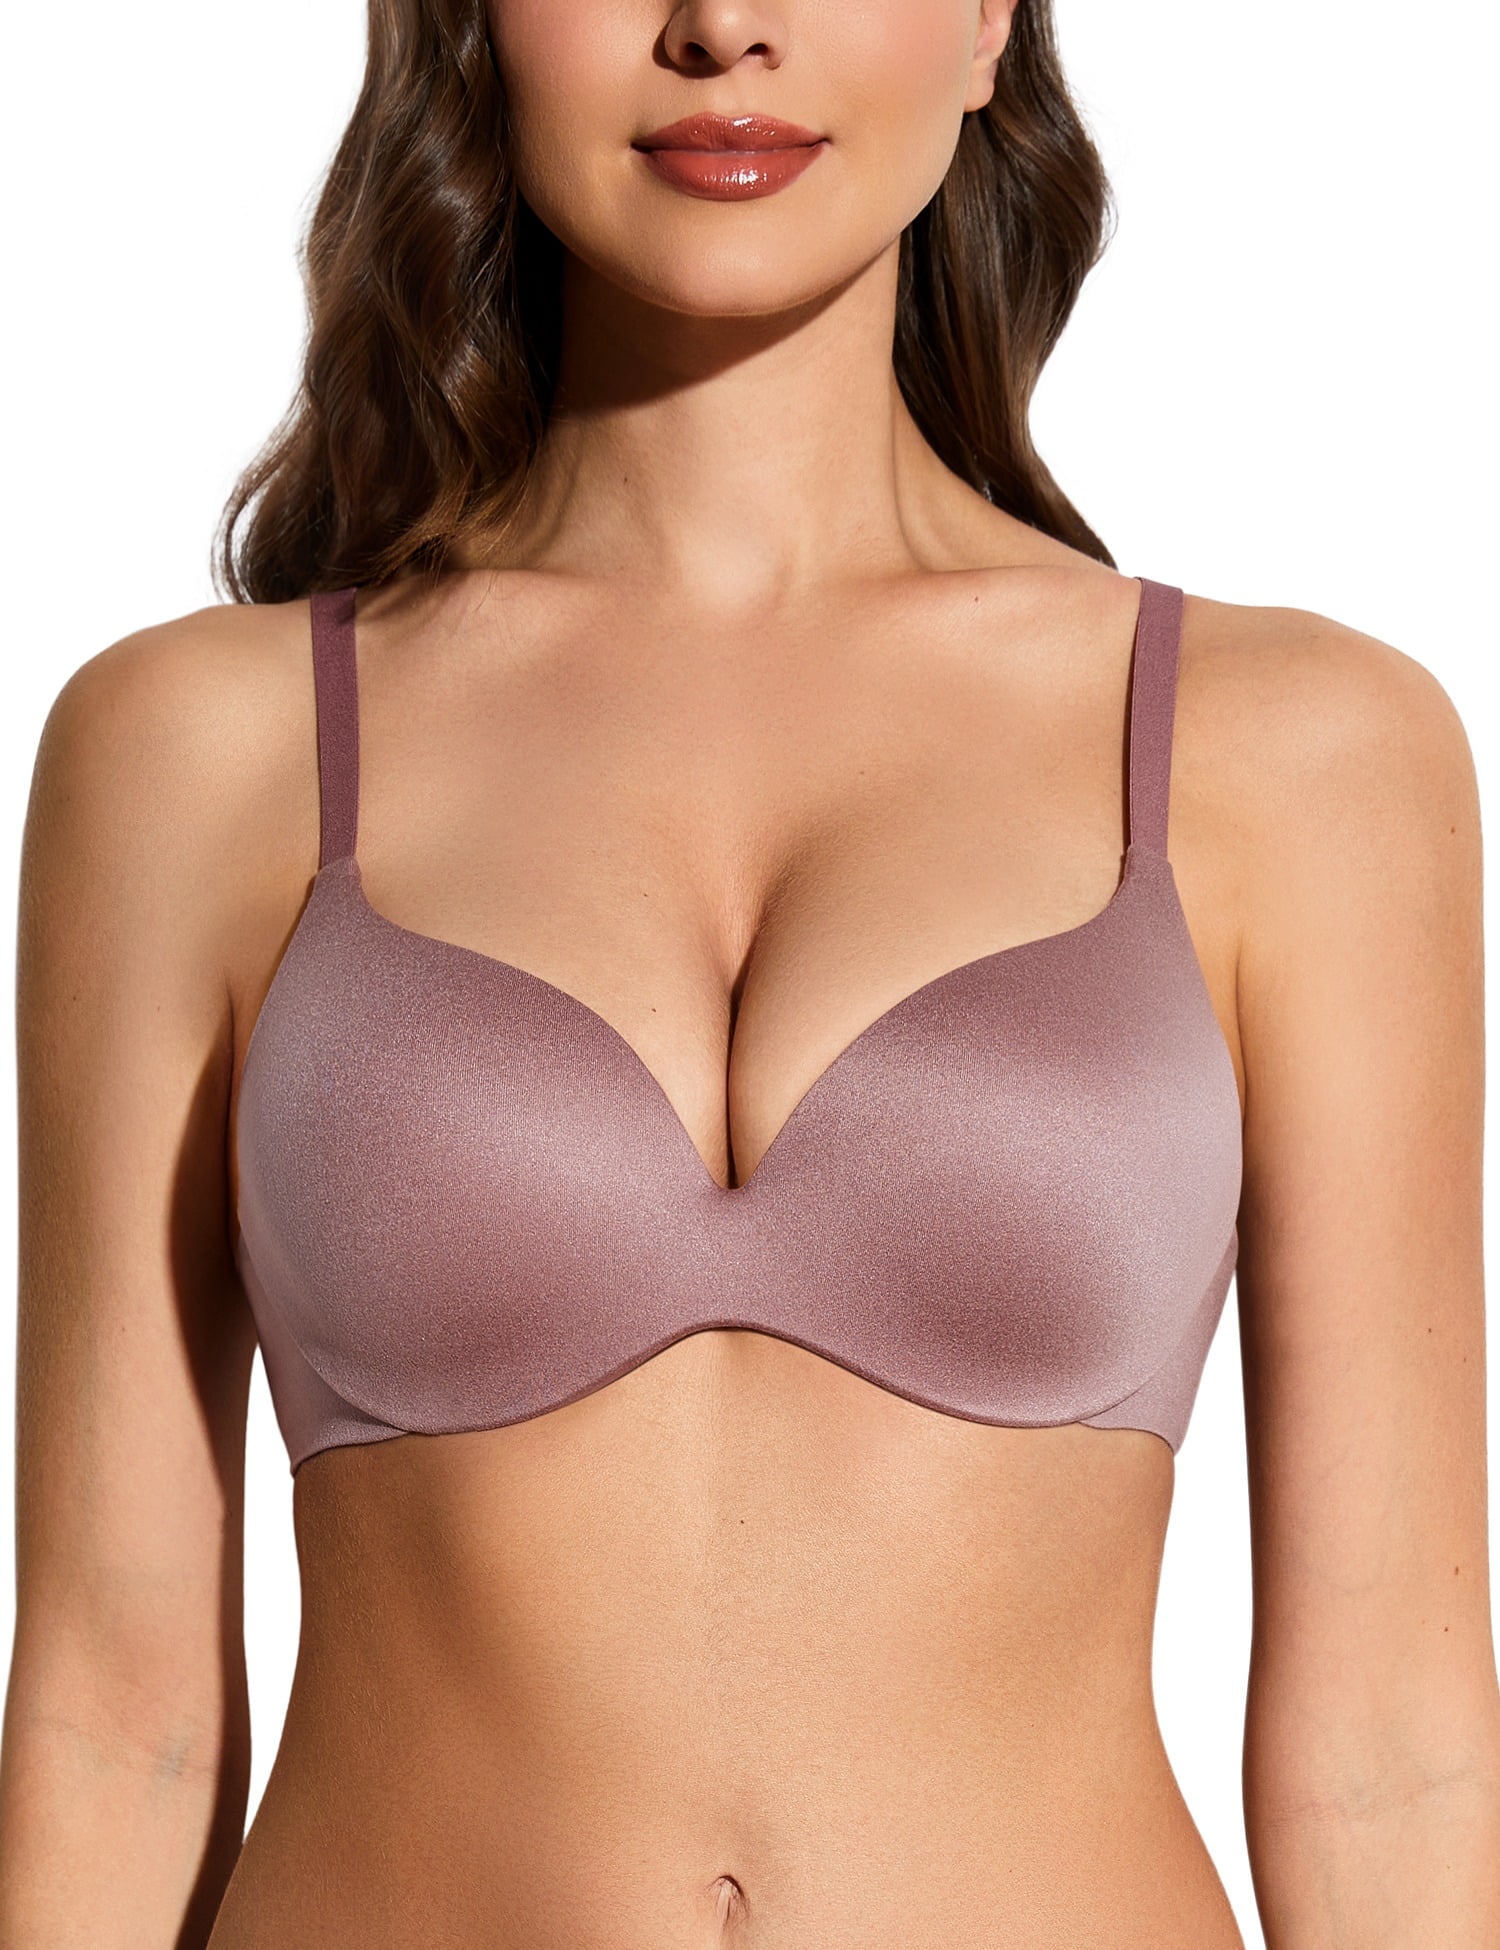 IMF sliding down, gap above breast, gore might not be flat, band slightly  tight 34DD - Maidenform » Comfort Devotion (09436)